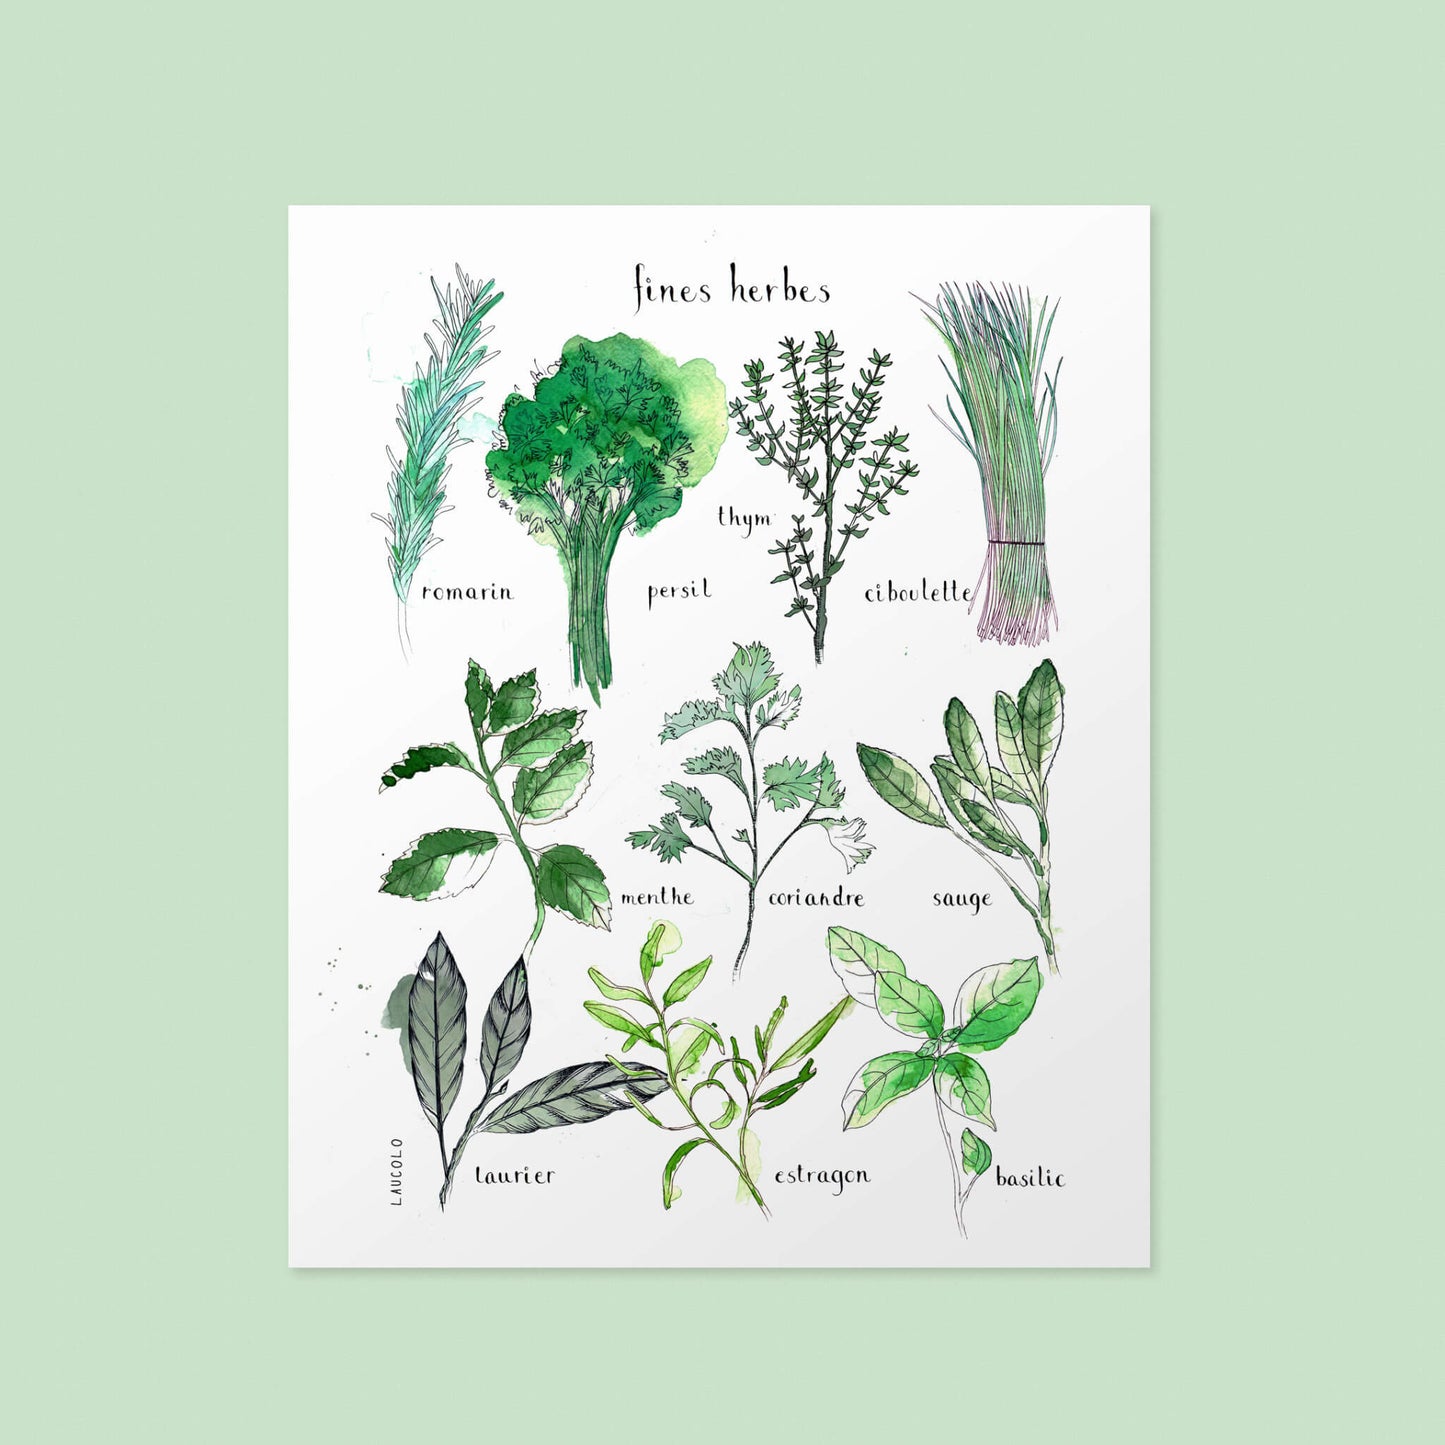 Fine herbs illustration poster by Laucolo